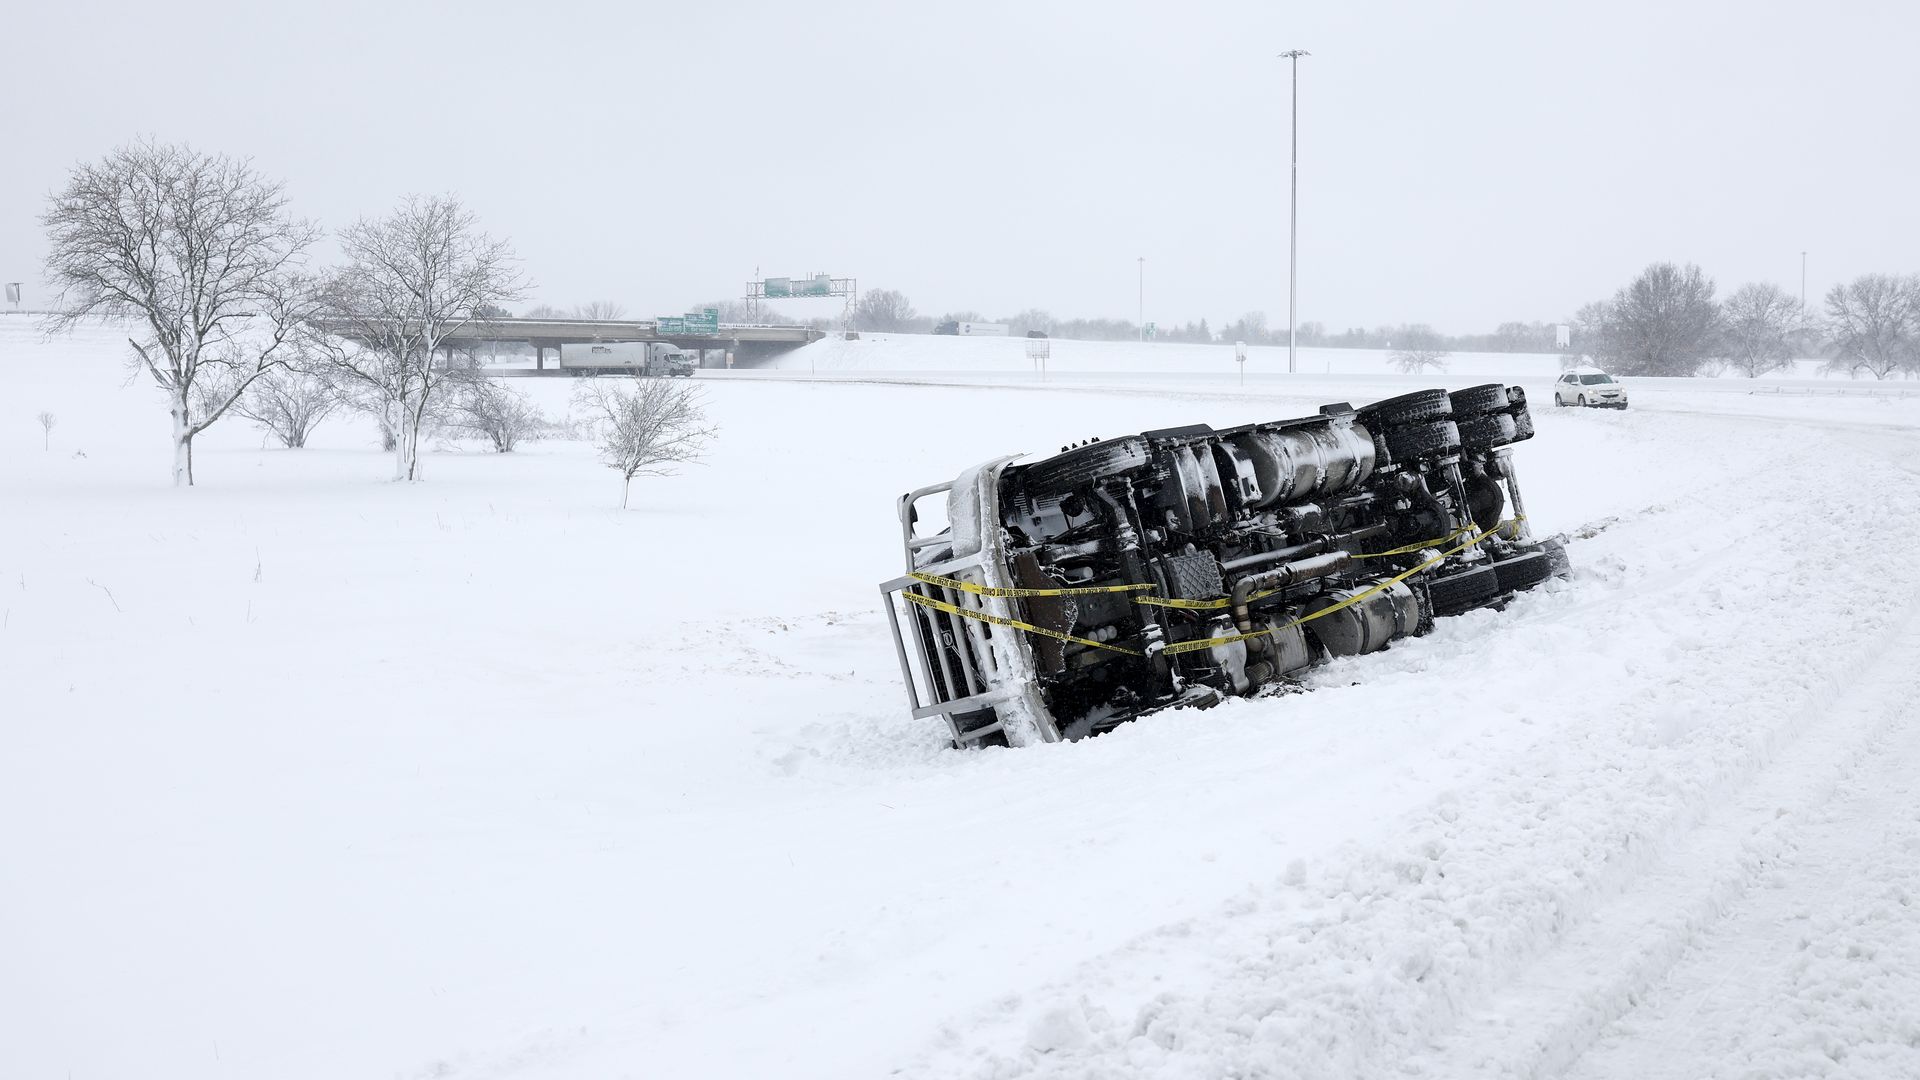 A semi-truck toppled over on the side of a road amidst a snowstorm in Des Moines, Iowa, on Jan. 9.